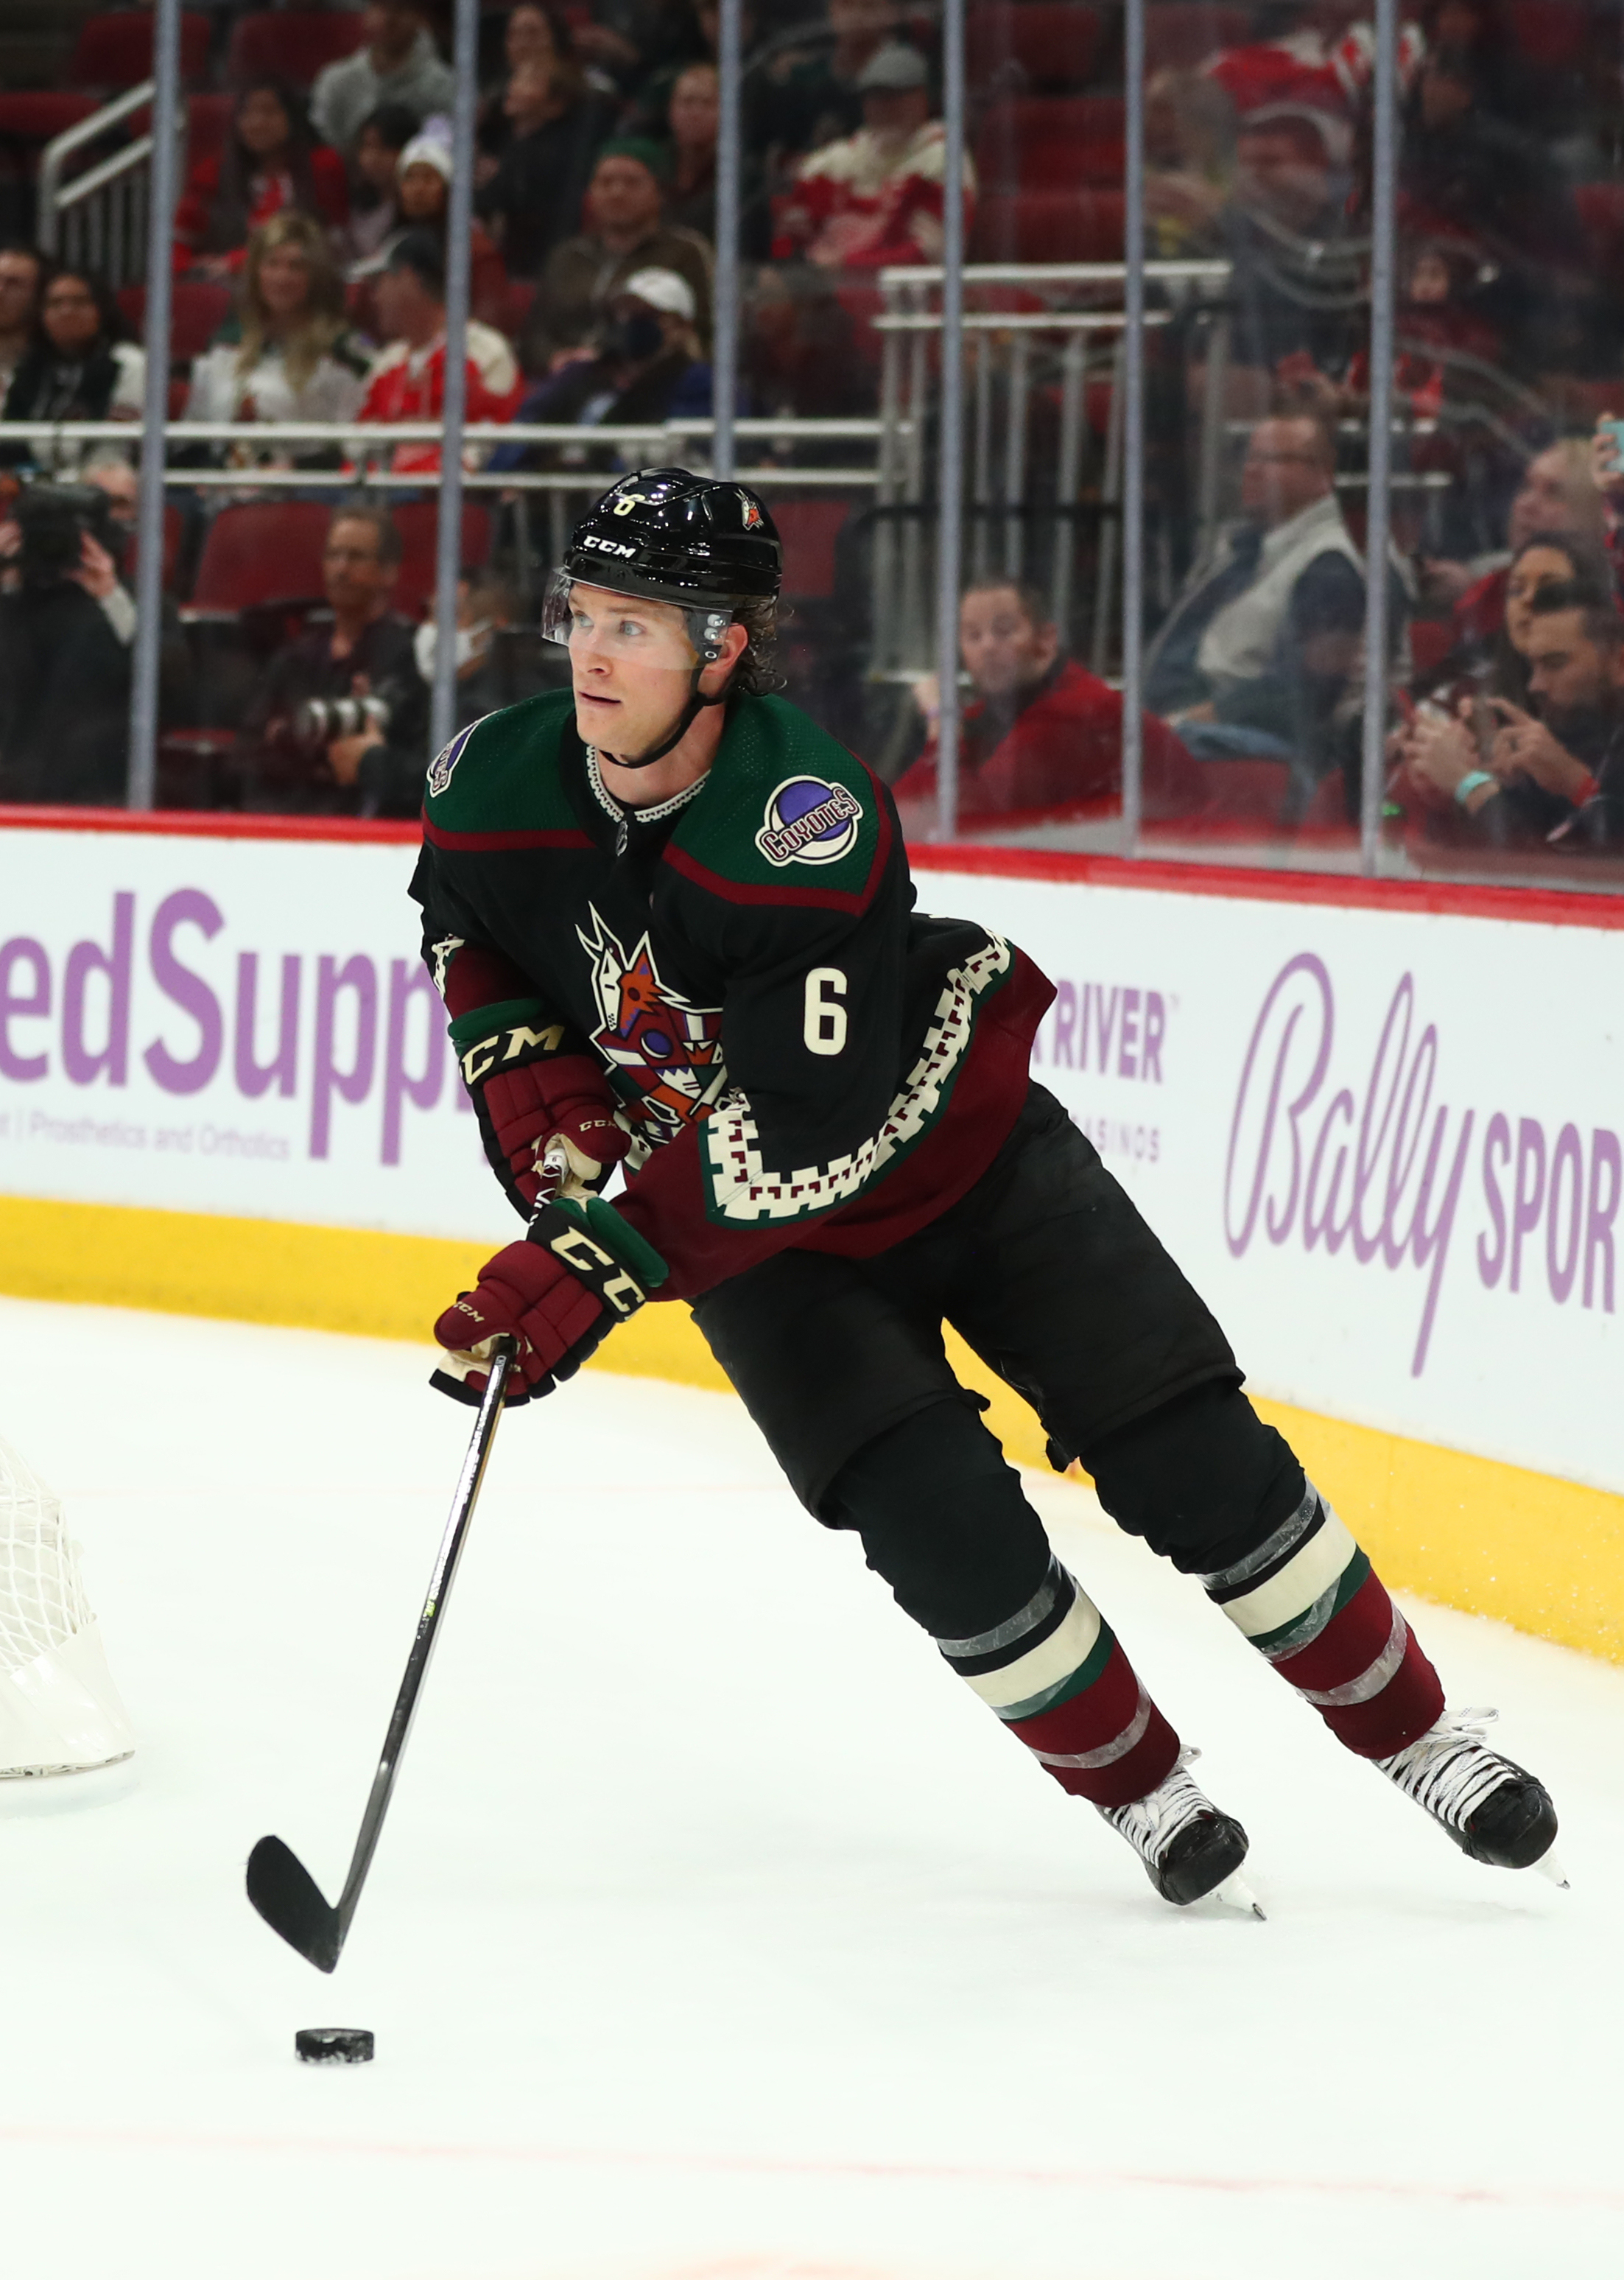 Coyotes Re-Sign Karel Vejmelka to Three-Year Extension - The